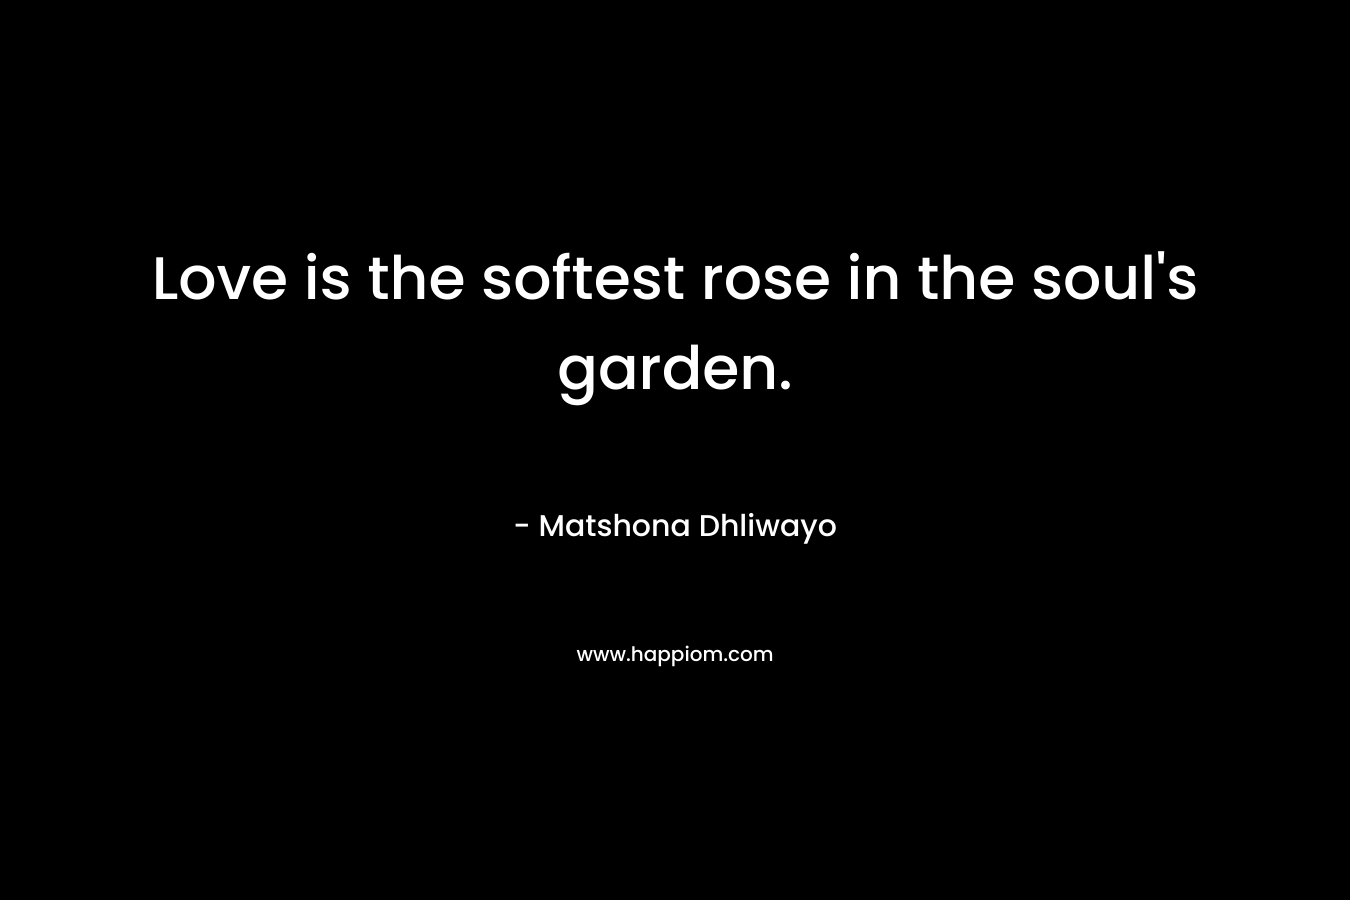 Love is the softest rose in the soul's garden.